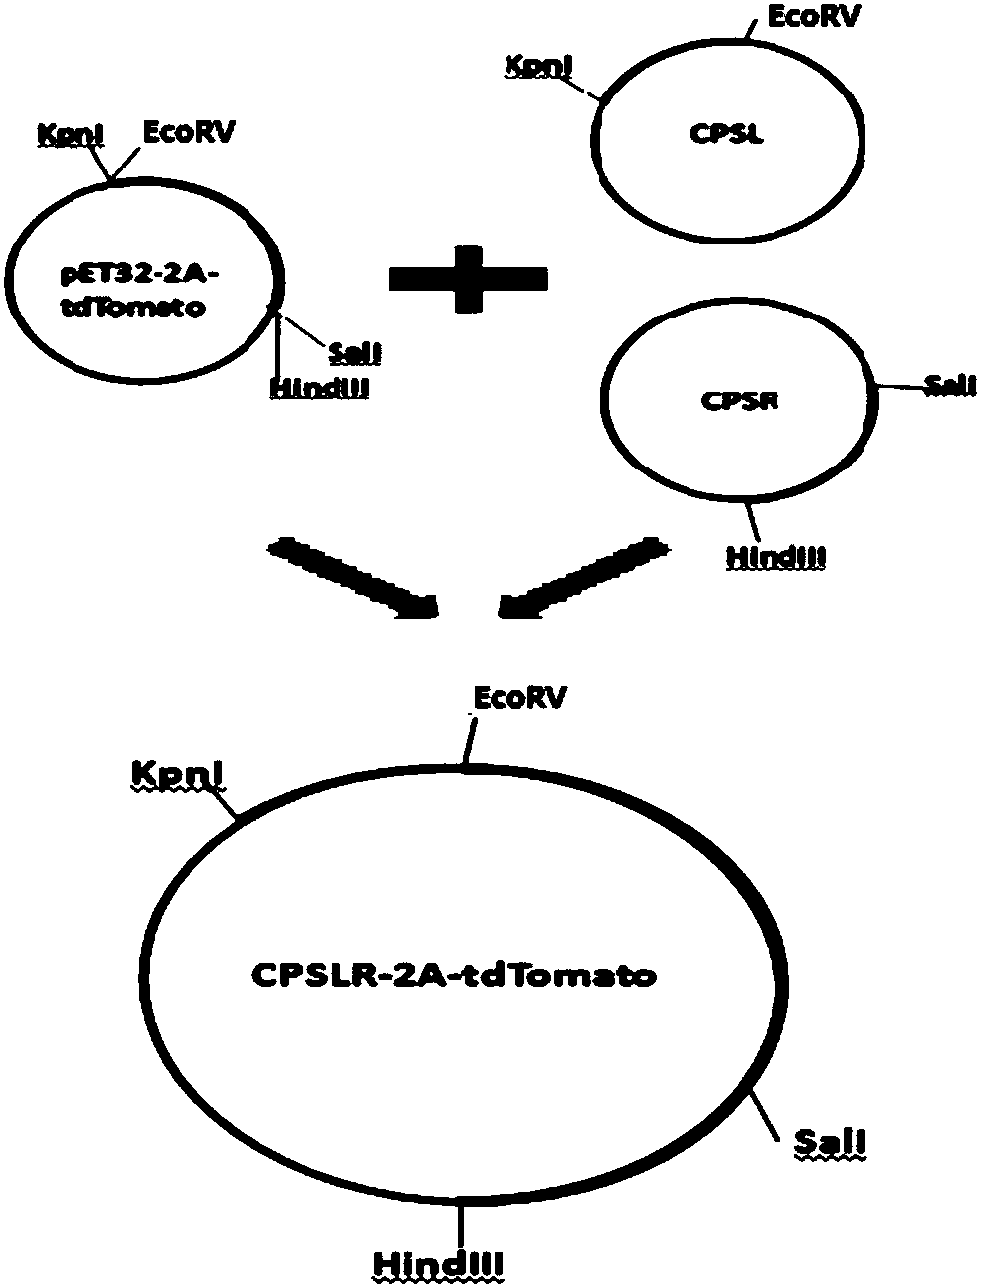 CPS1 report gene stem cell, and building method and application thereof